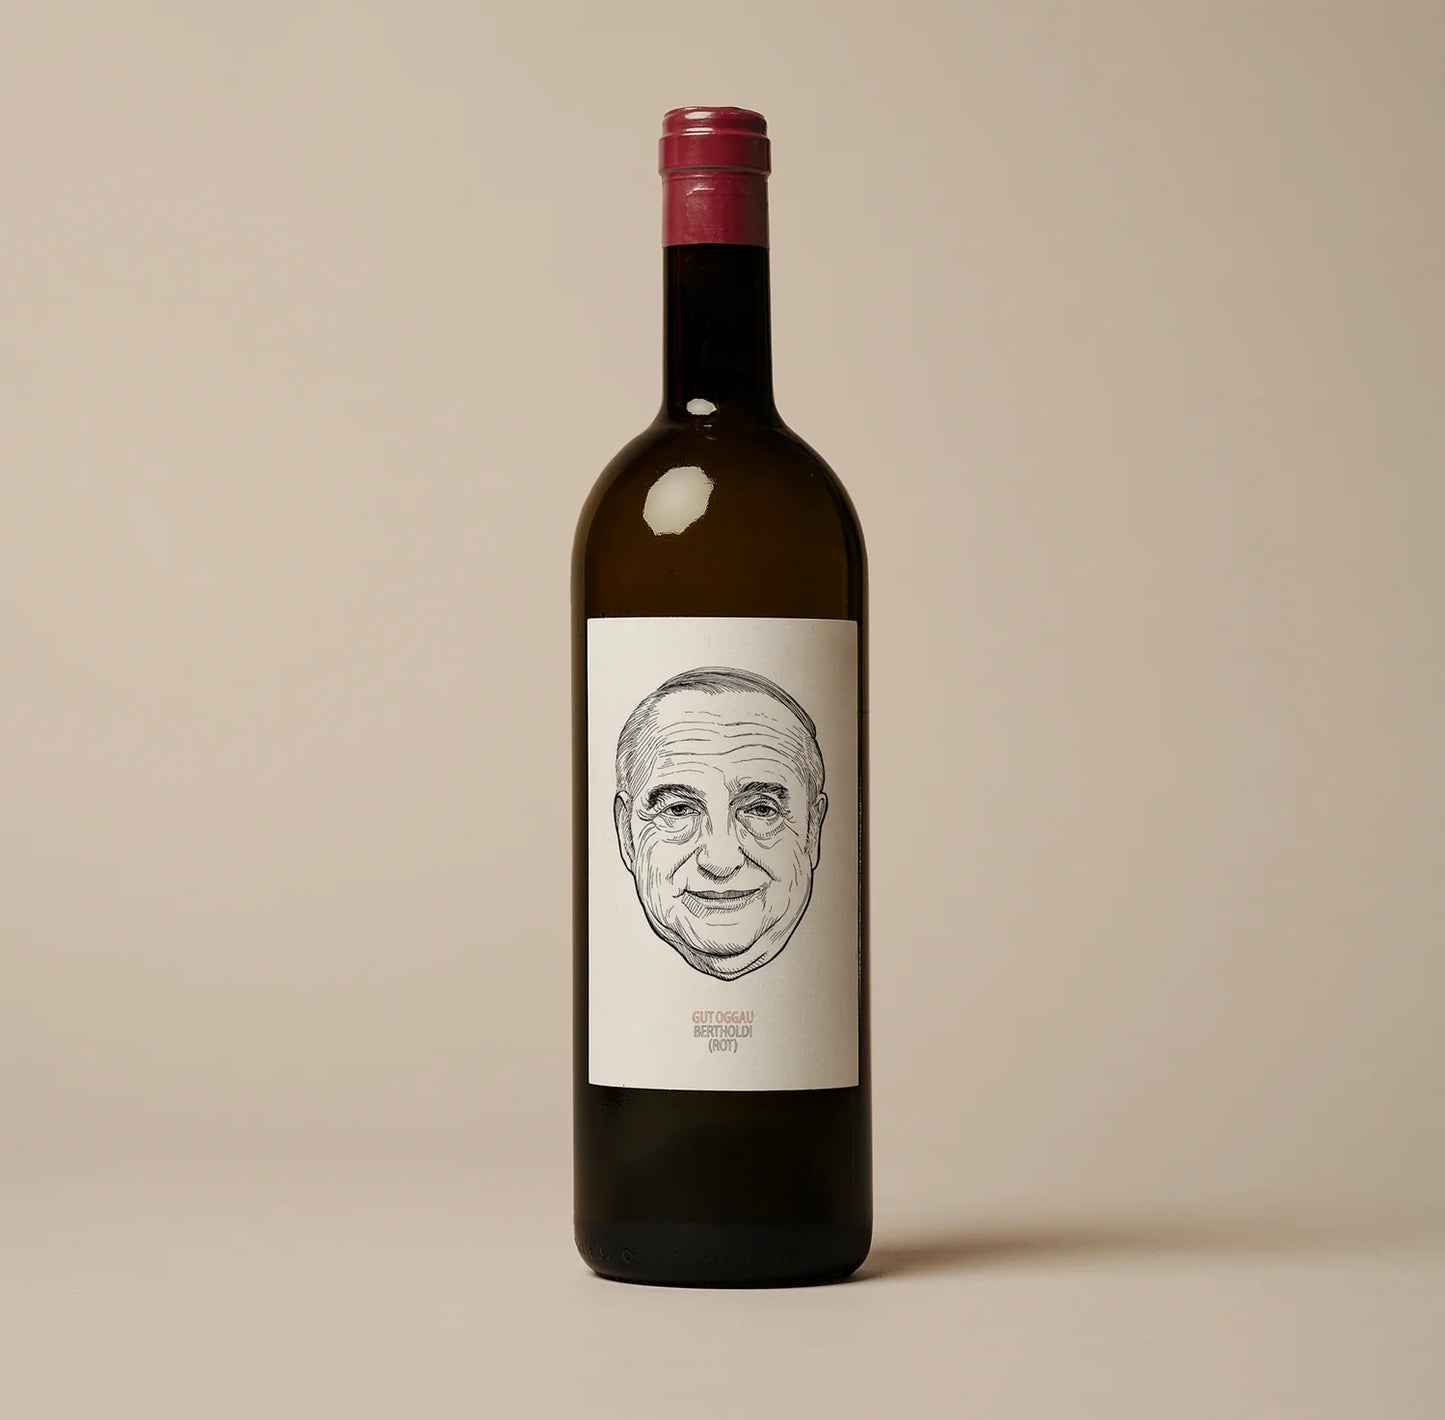 wine bottle with old man face on label